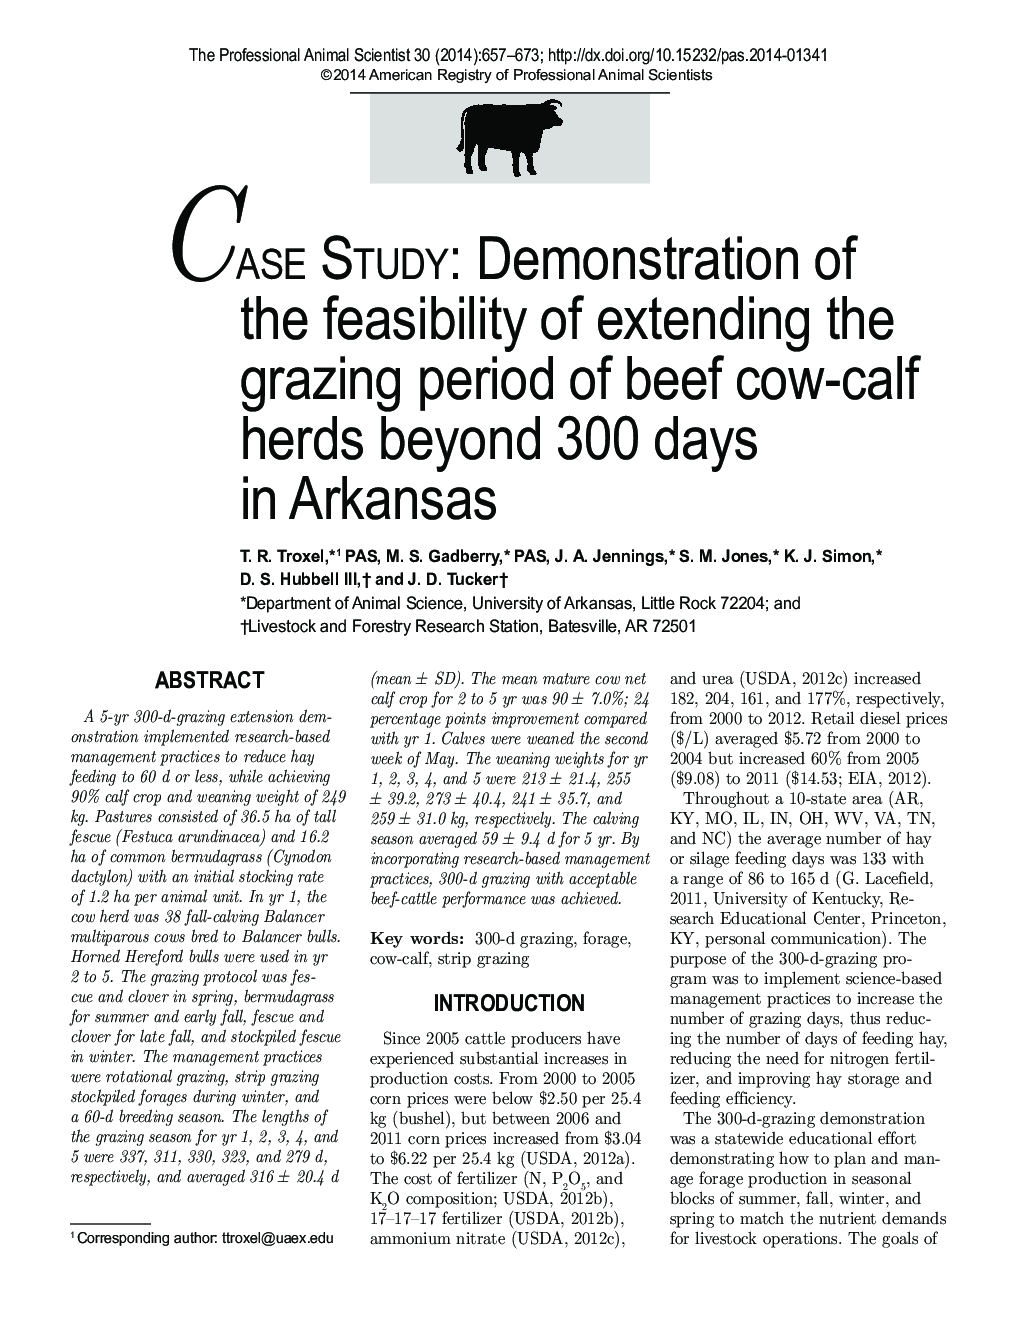 CASE STUDY: Demonstration of the feasibility of extending the grazing period of beef cow-calf herds beyond 300 days in Arkansas